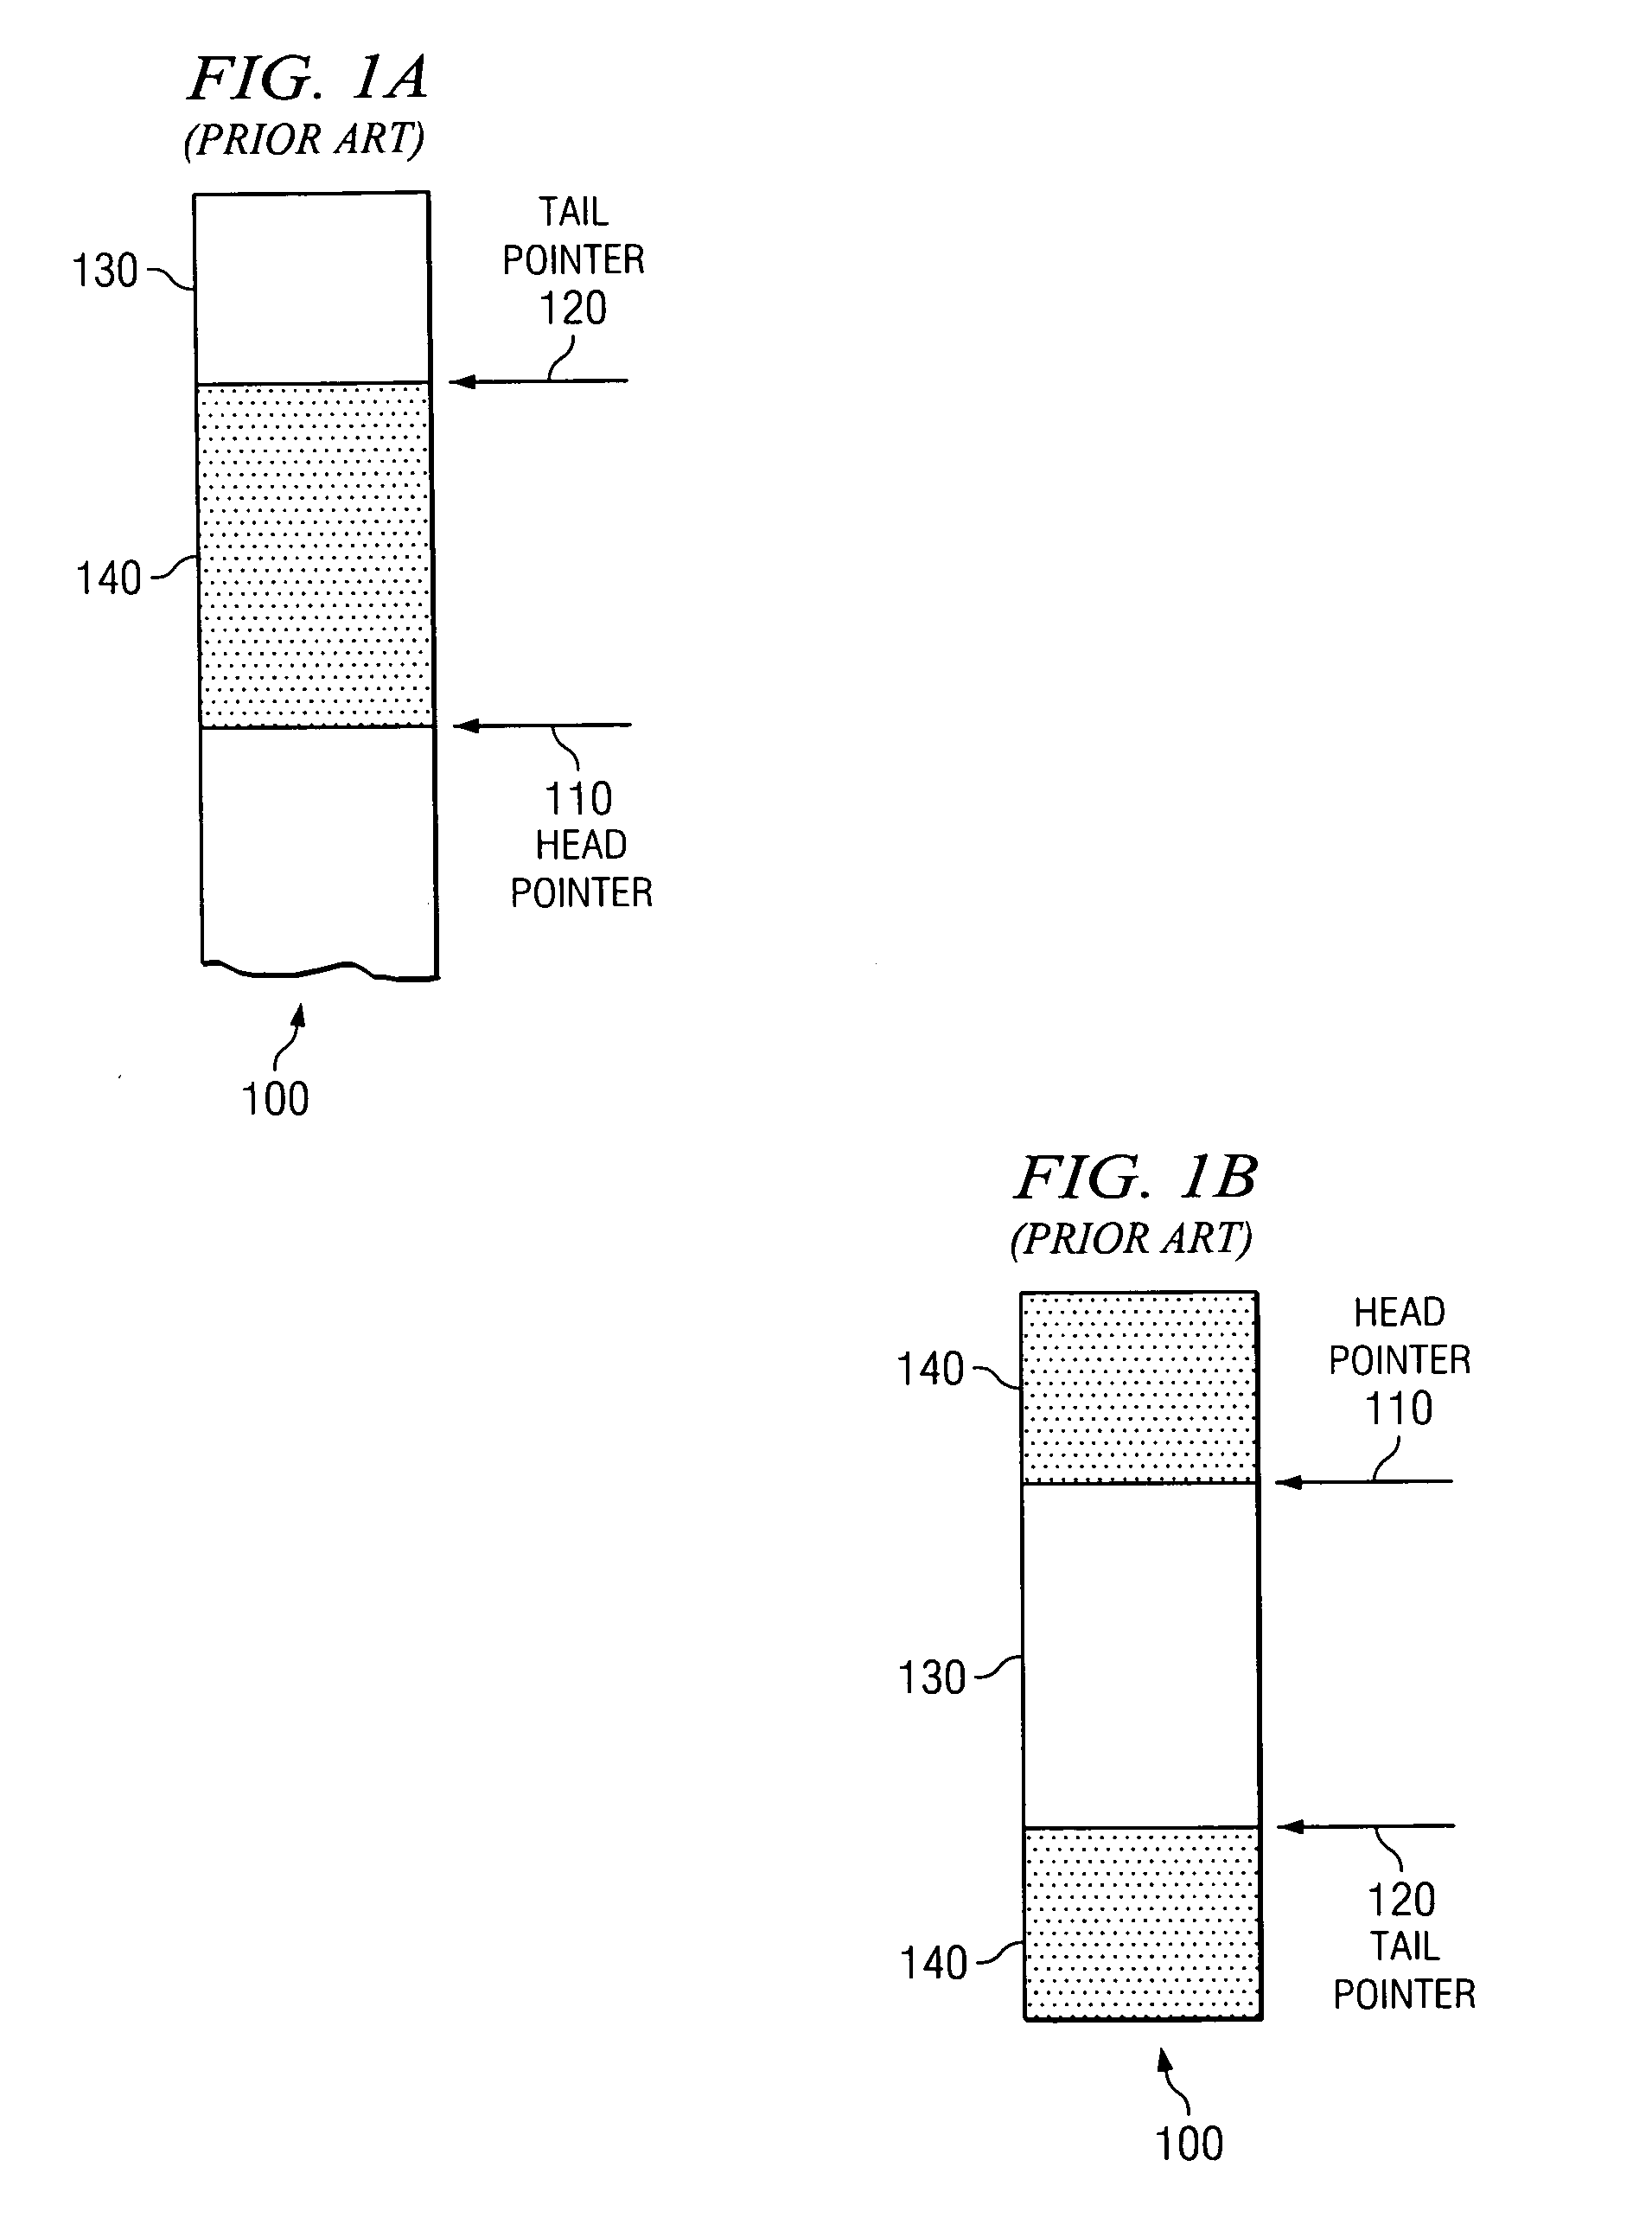 Apparatus and method for efficient communication of producer/consumer buffer status